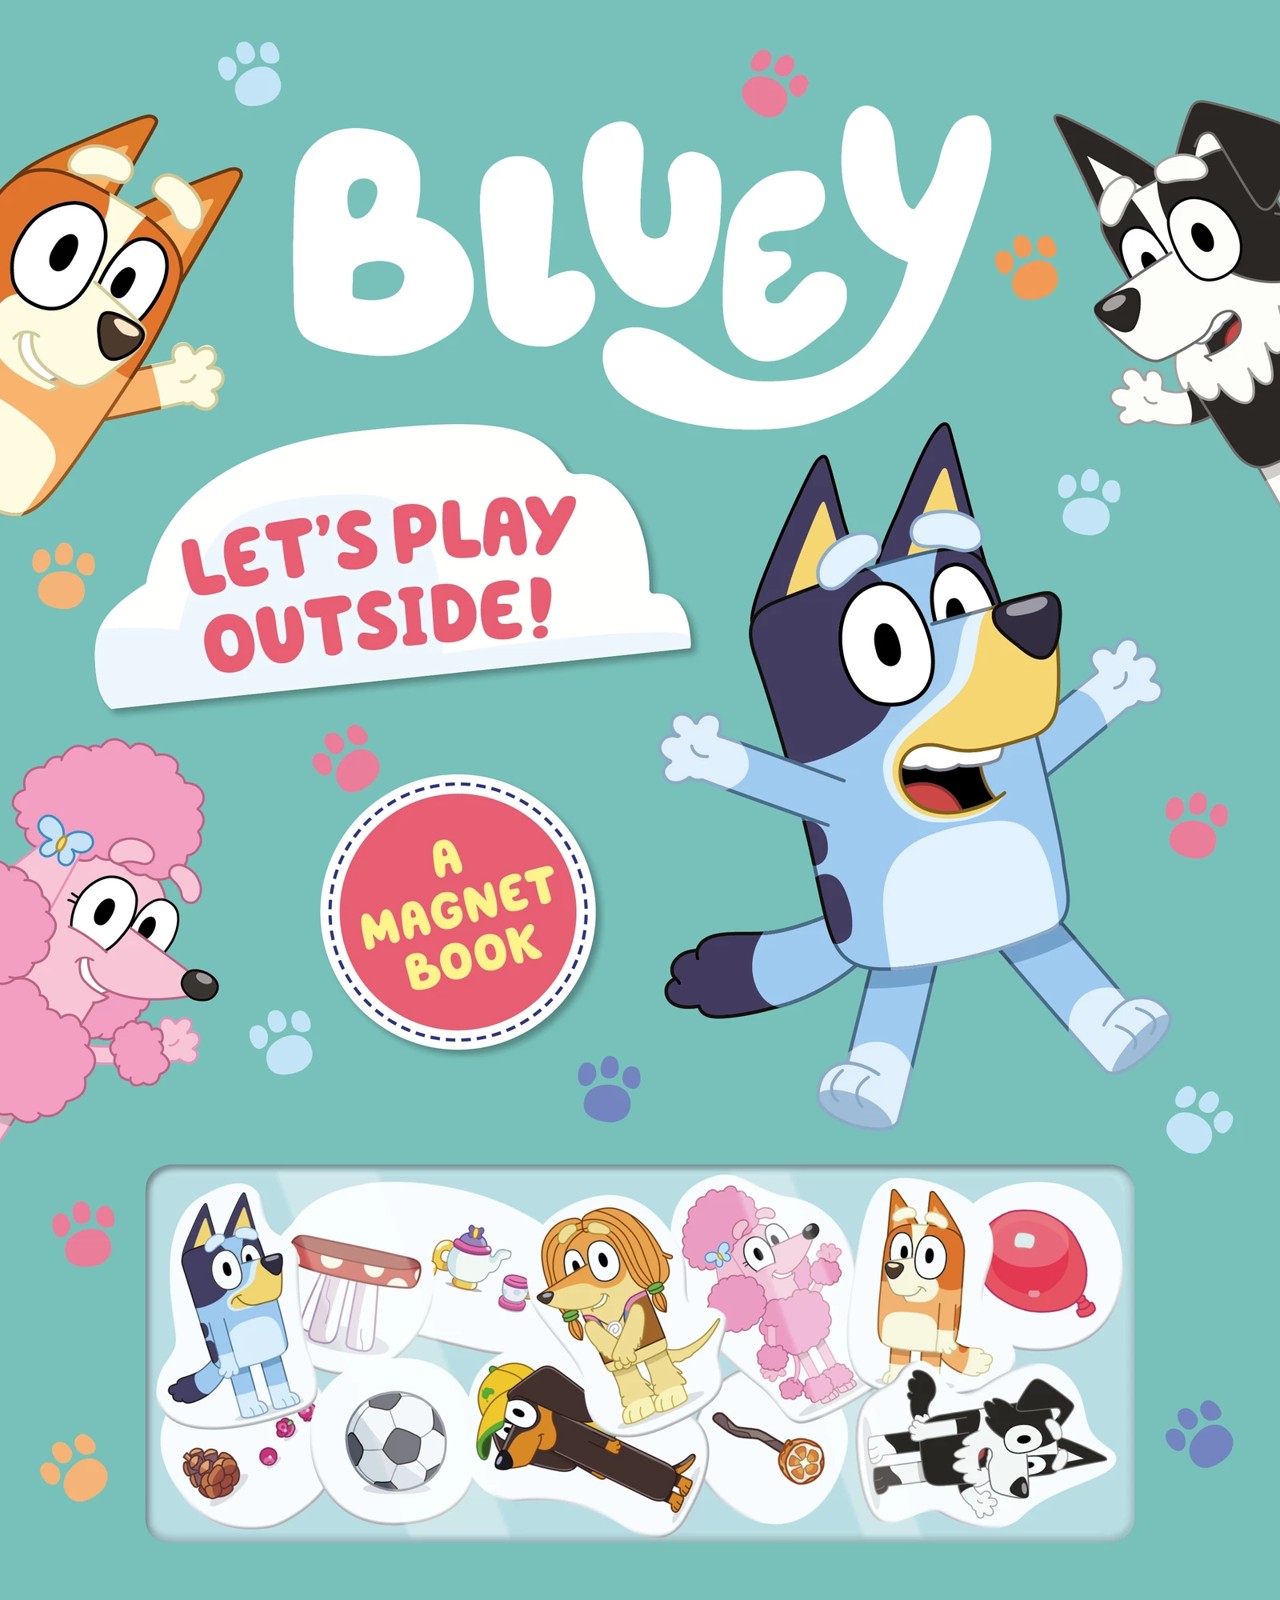 Bluey: Let's Play Outside Magnet Book